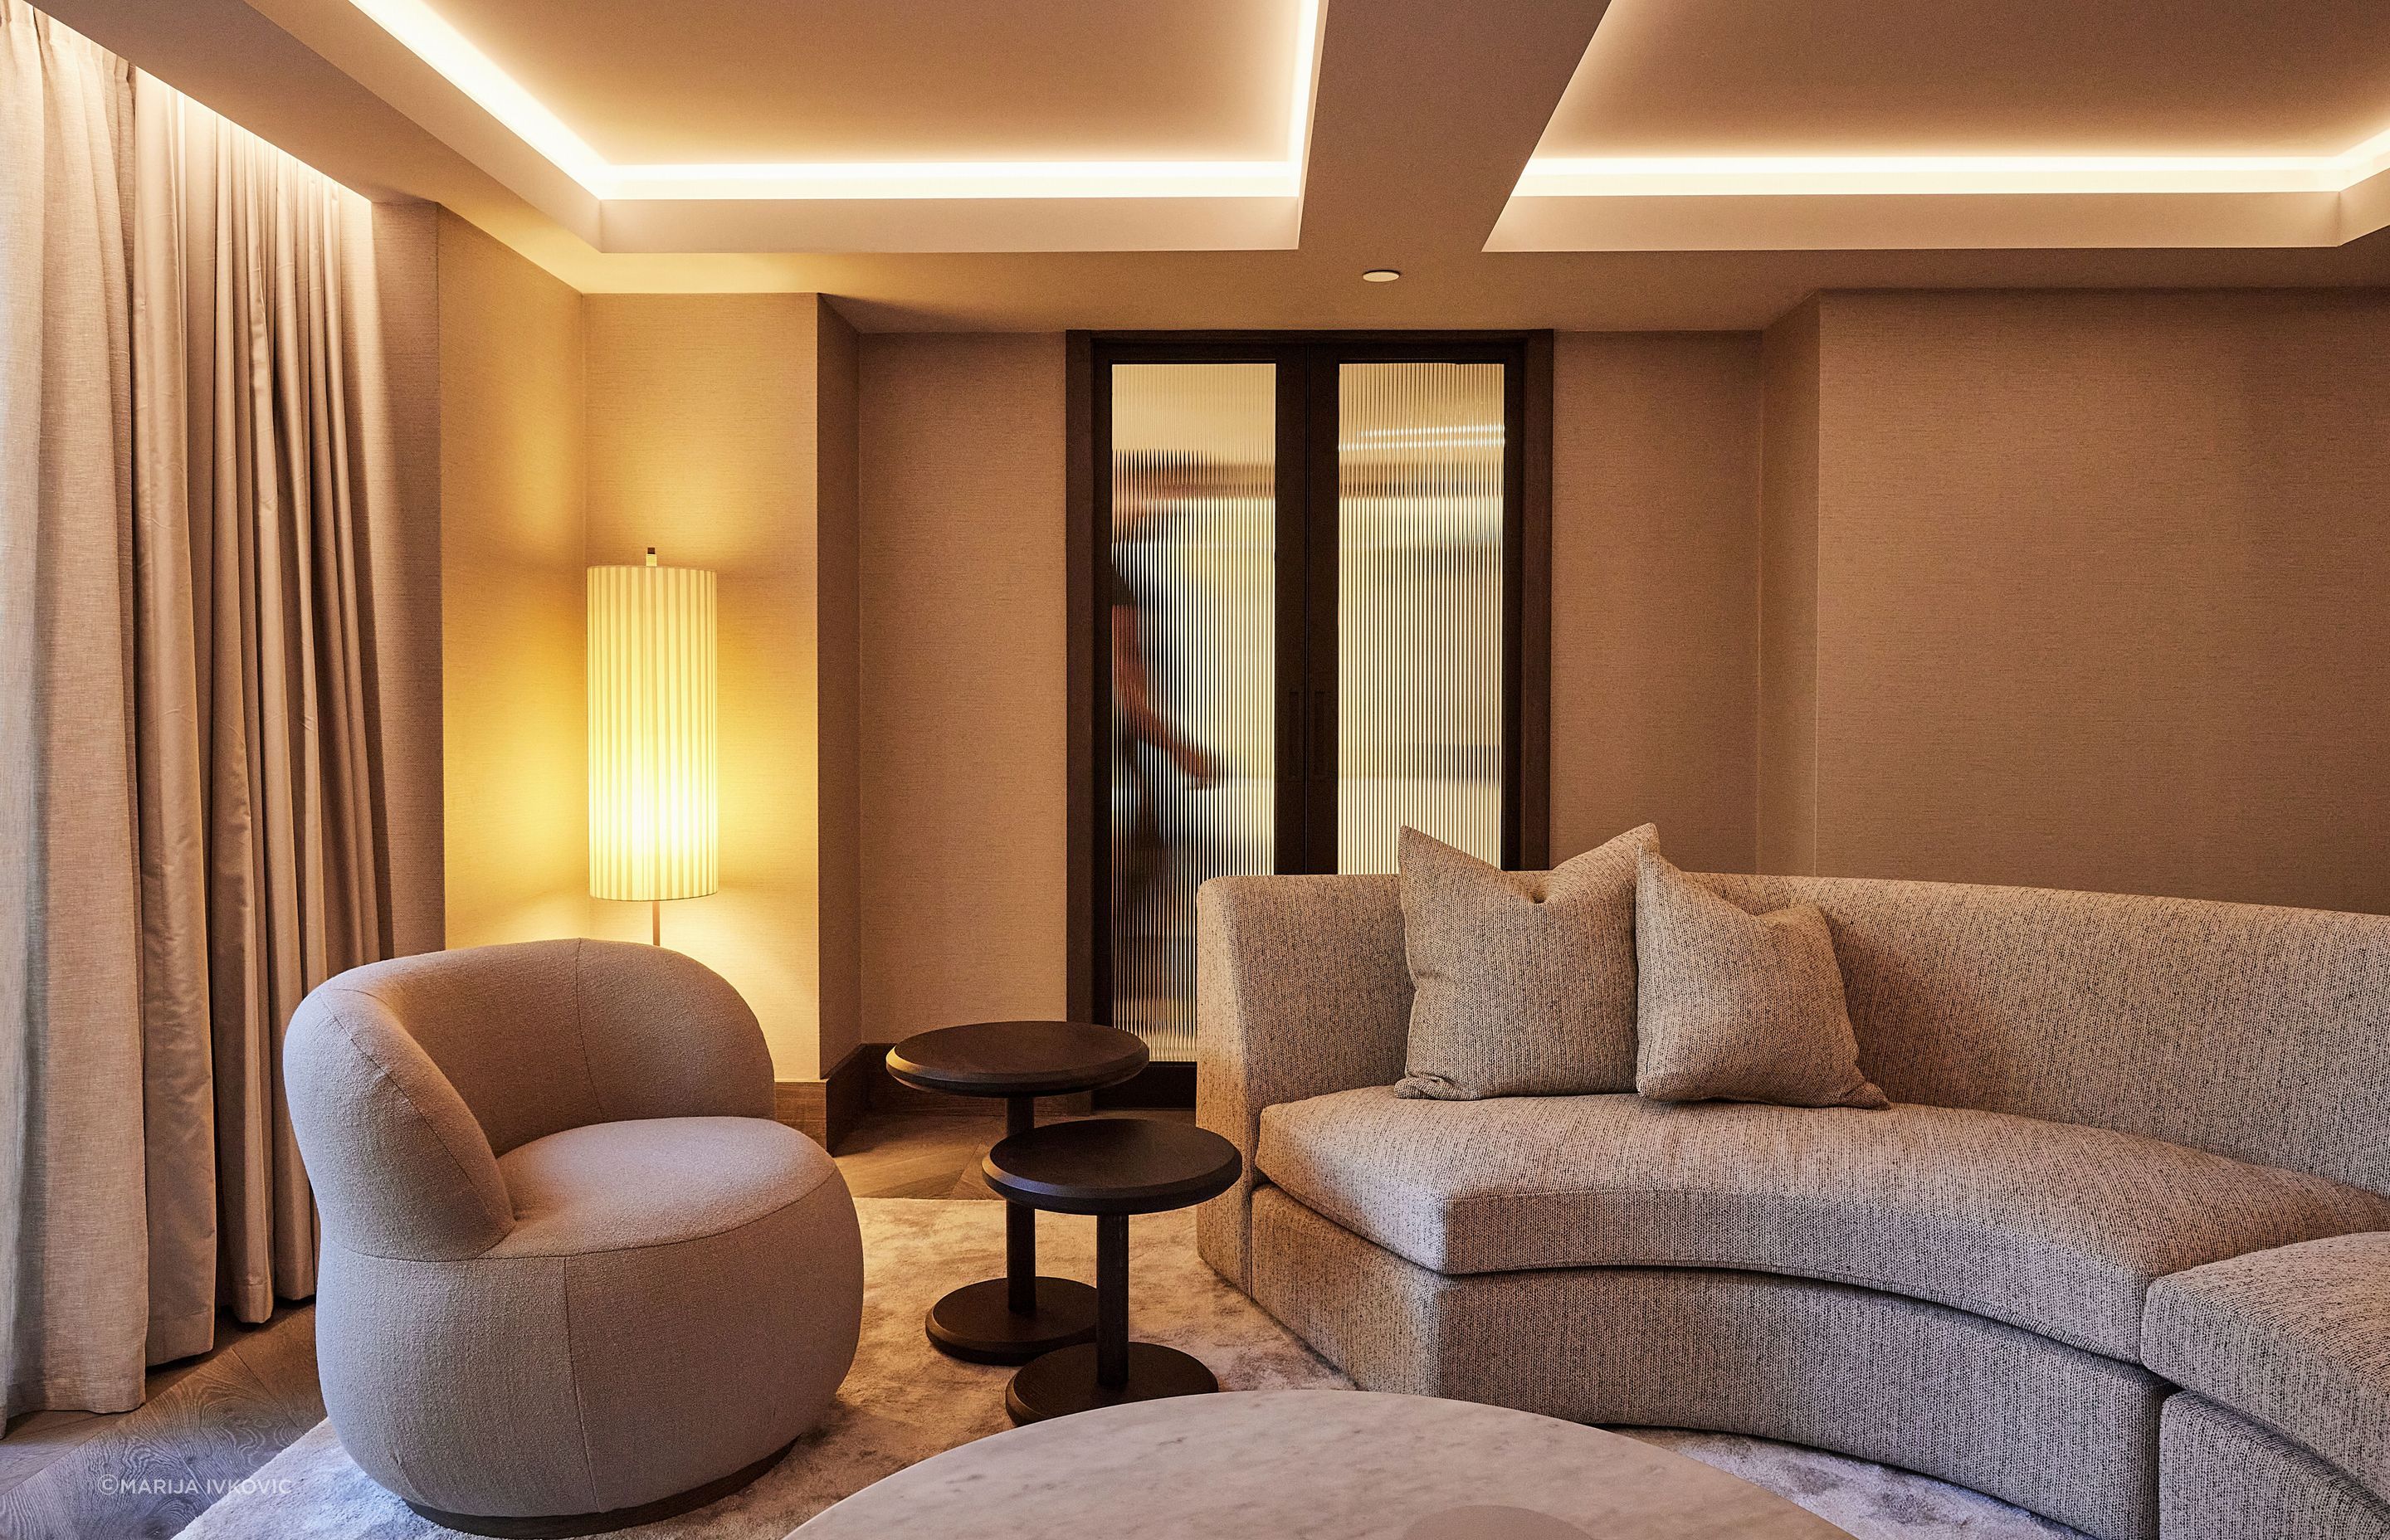 Each suite is expansive in size, and offers a lounge room that evokes an intimacy and residential-like scale.